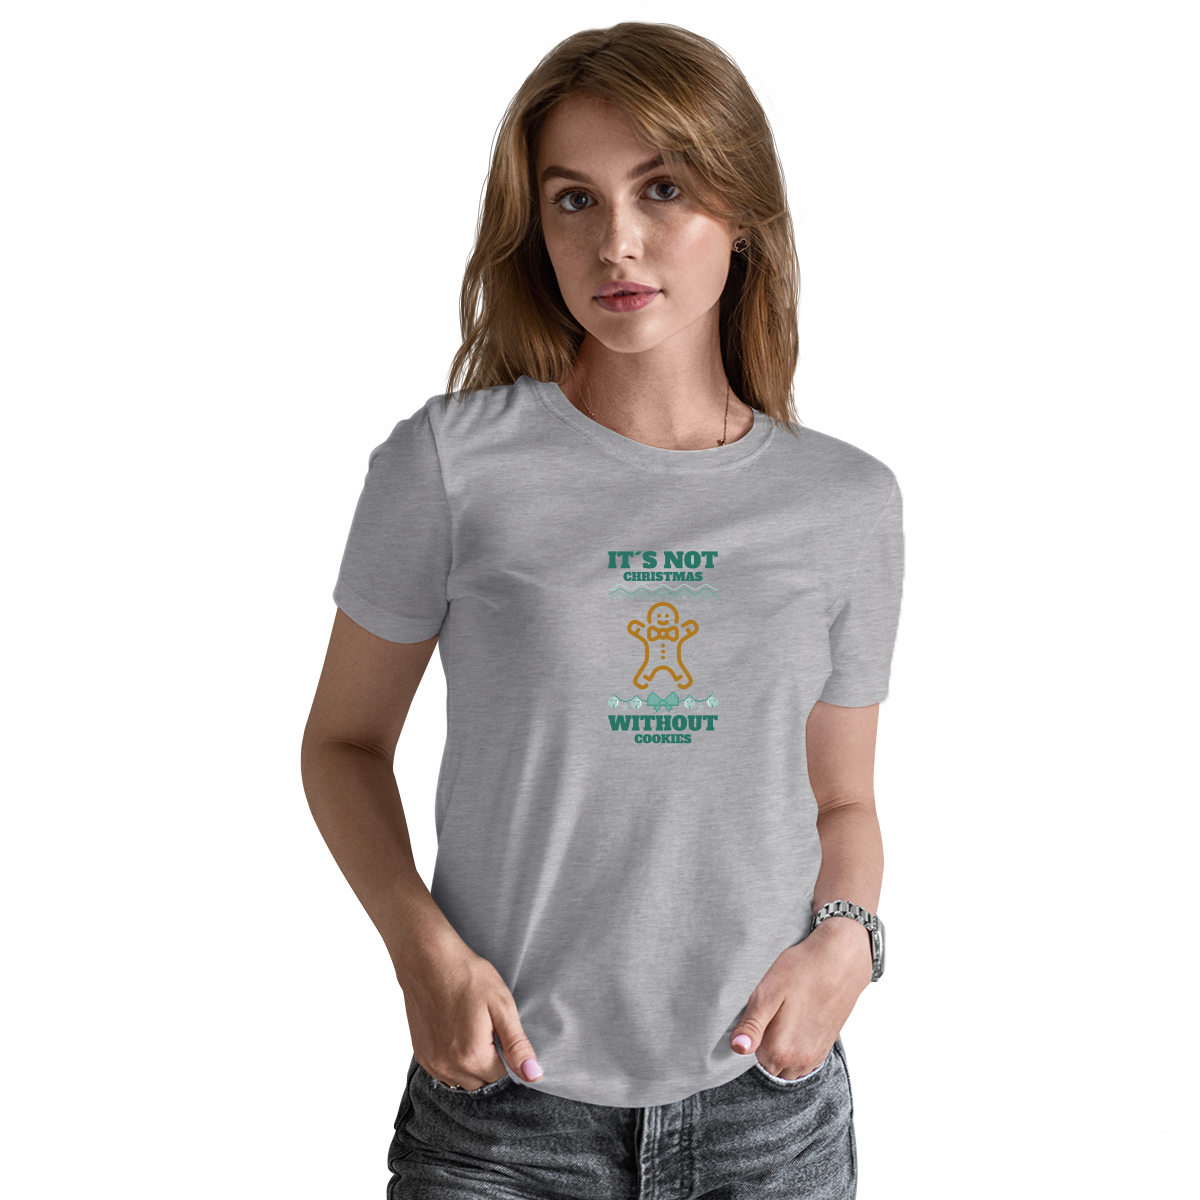 It's Not Christmas Without Cookies Women's T-shirt | Gray